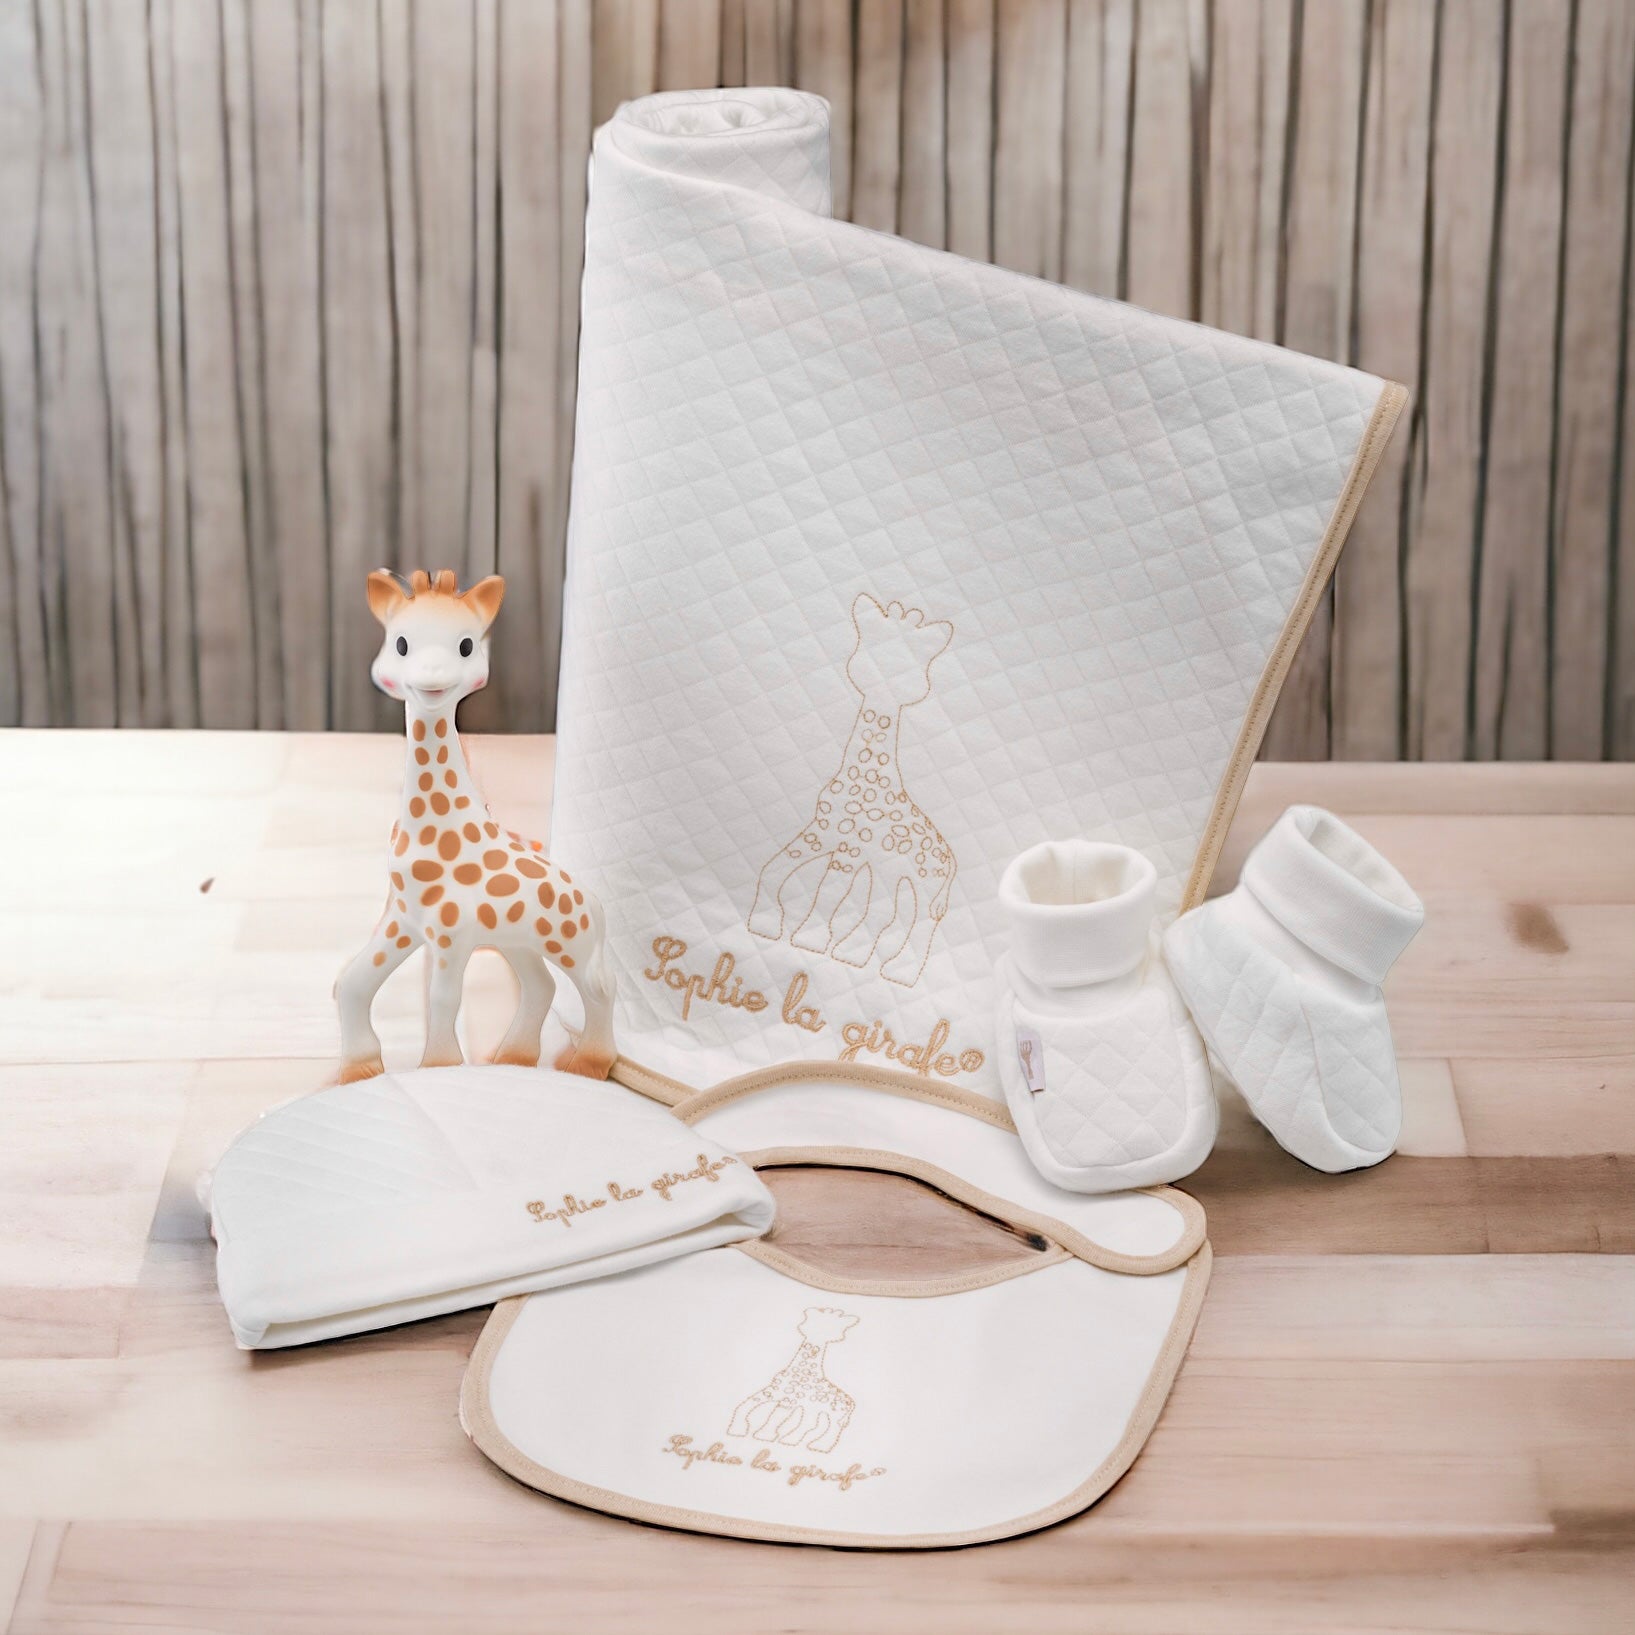 Sophie the Giraffe So Pure "My Birth Outfit" Cosy Baby Gift Set